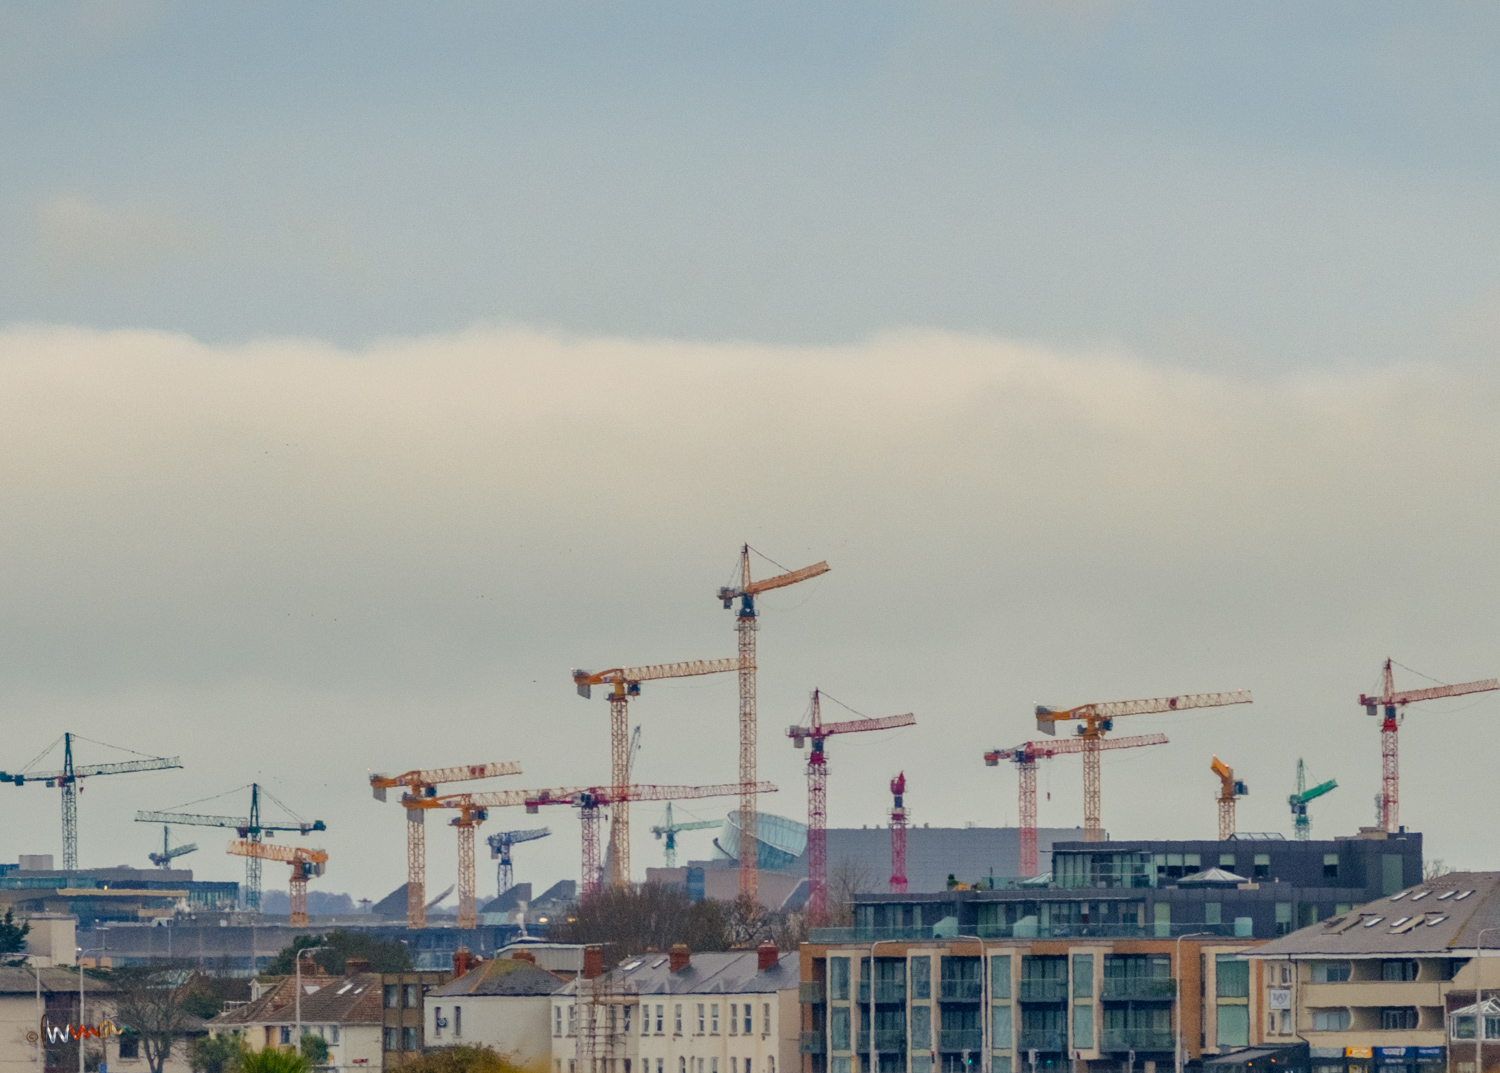 There’s a bling of sky cranes governing the city. Developers jewels. Screams of prosperity. Their twin goals improve safety for labour with capital efficiency for the investors. Individually impermanent, they change the perspectives of urban reinvention.